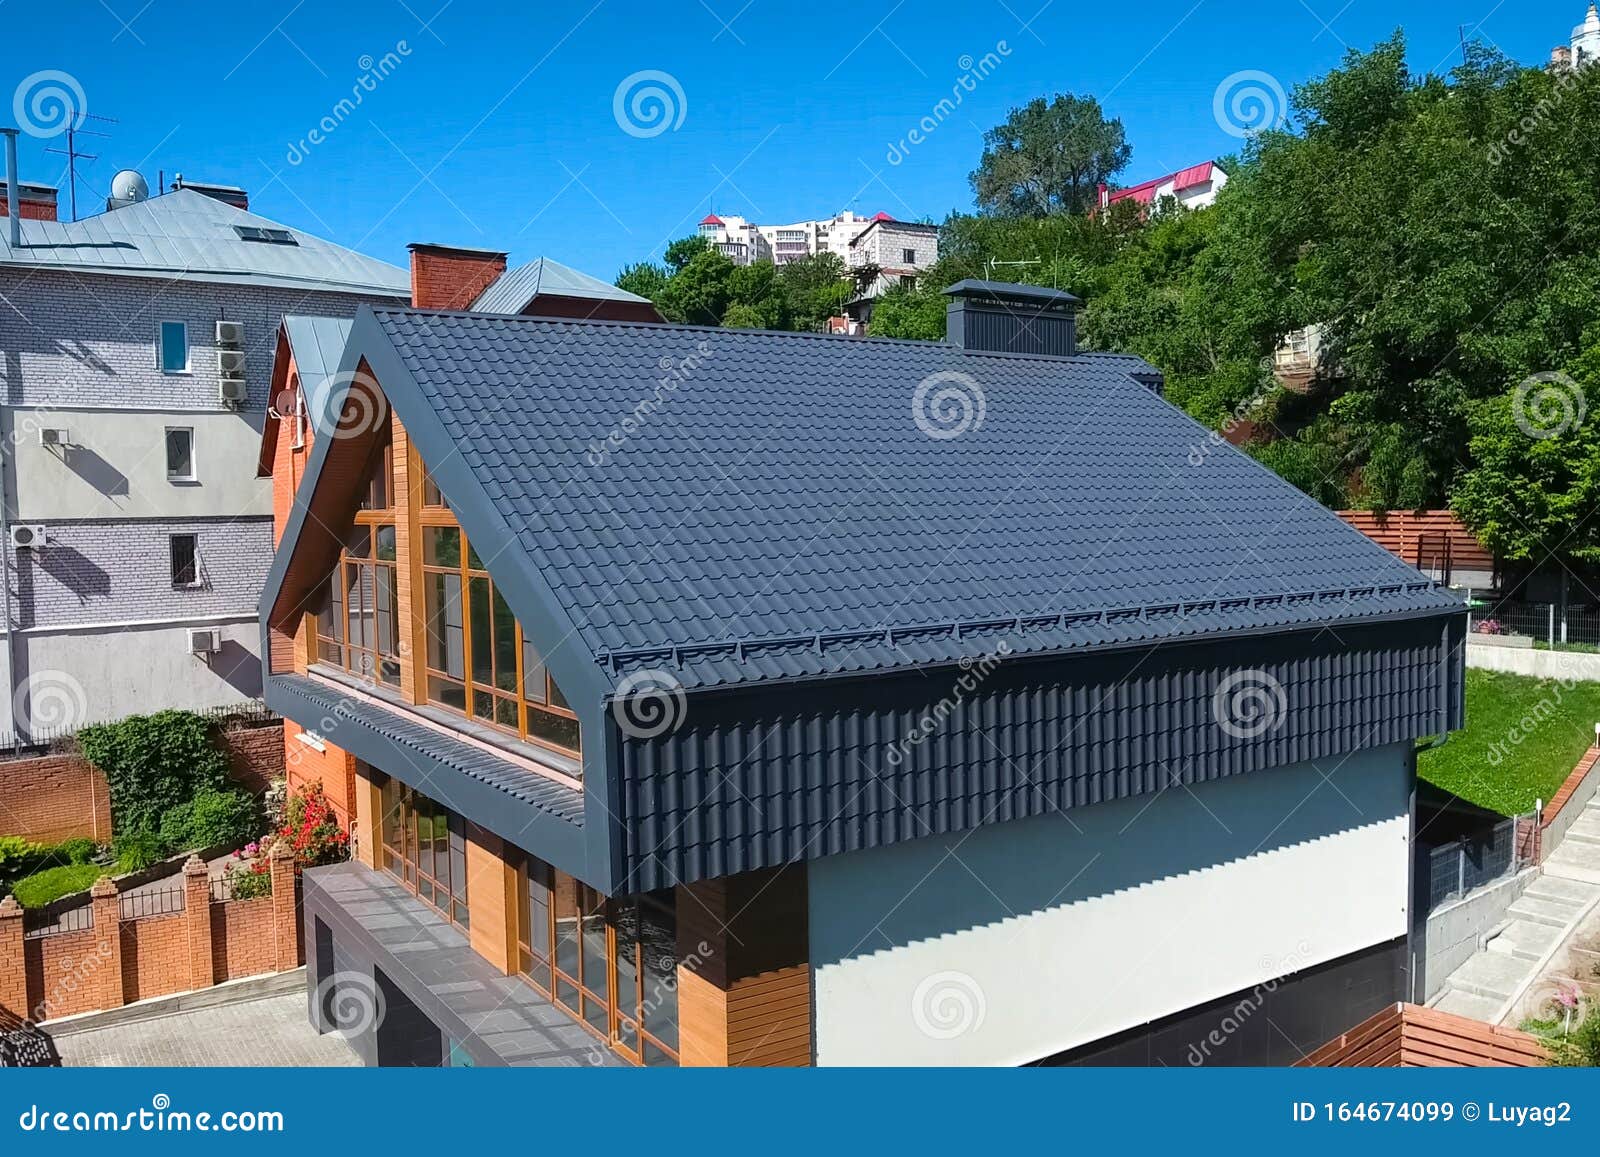 House With A Gray Metal Roof. Corrugated Metal Roof And Metal Ro Stock Image Image of